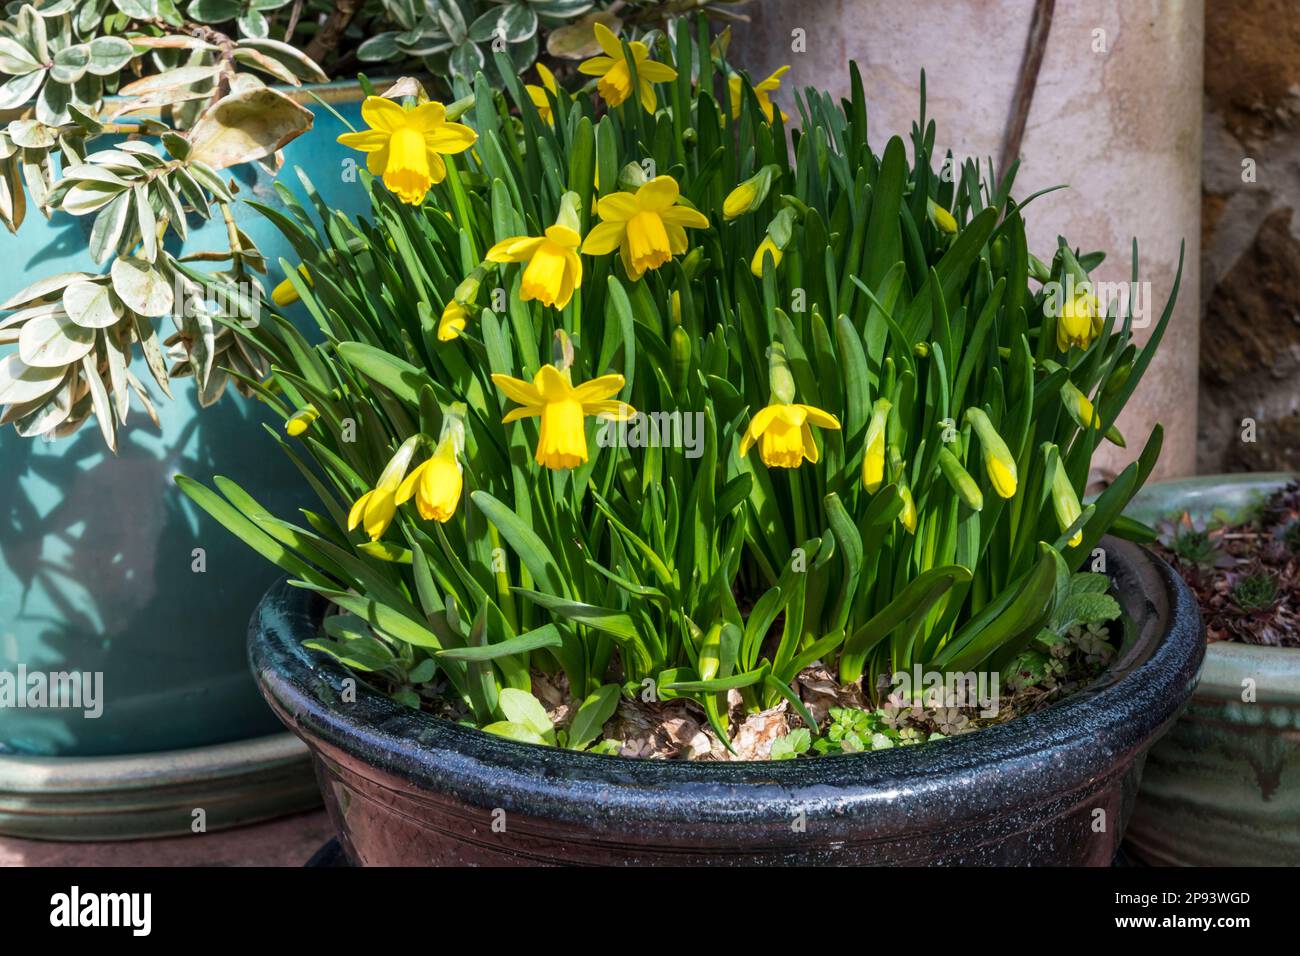 A bowl planted with Tete a Tete Narcissus, miniature daffodil bulbs. Stock Photo